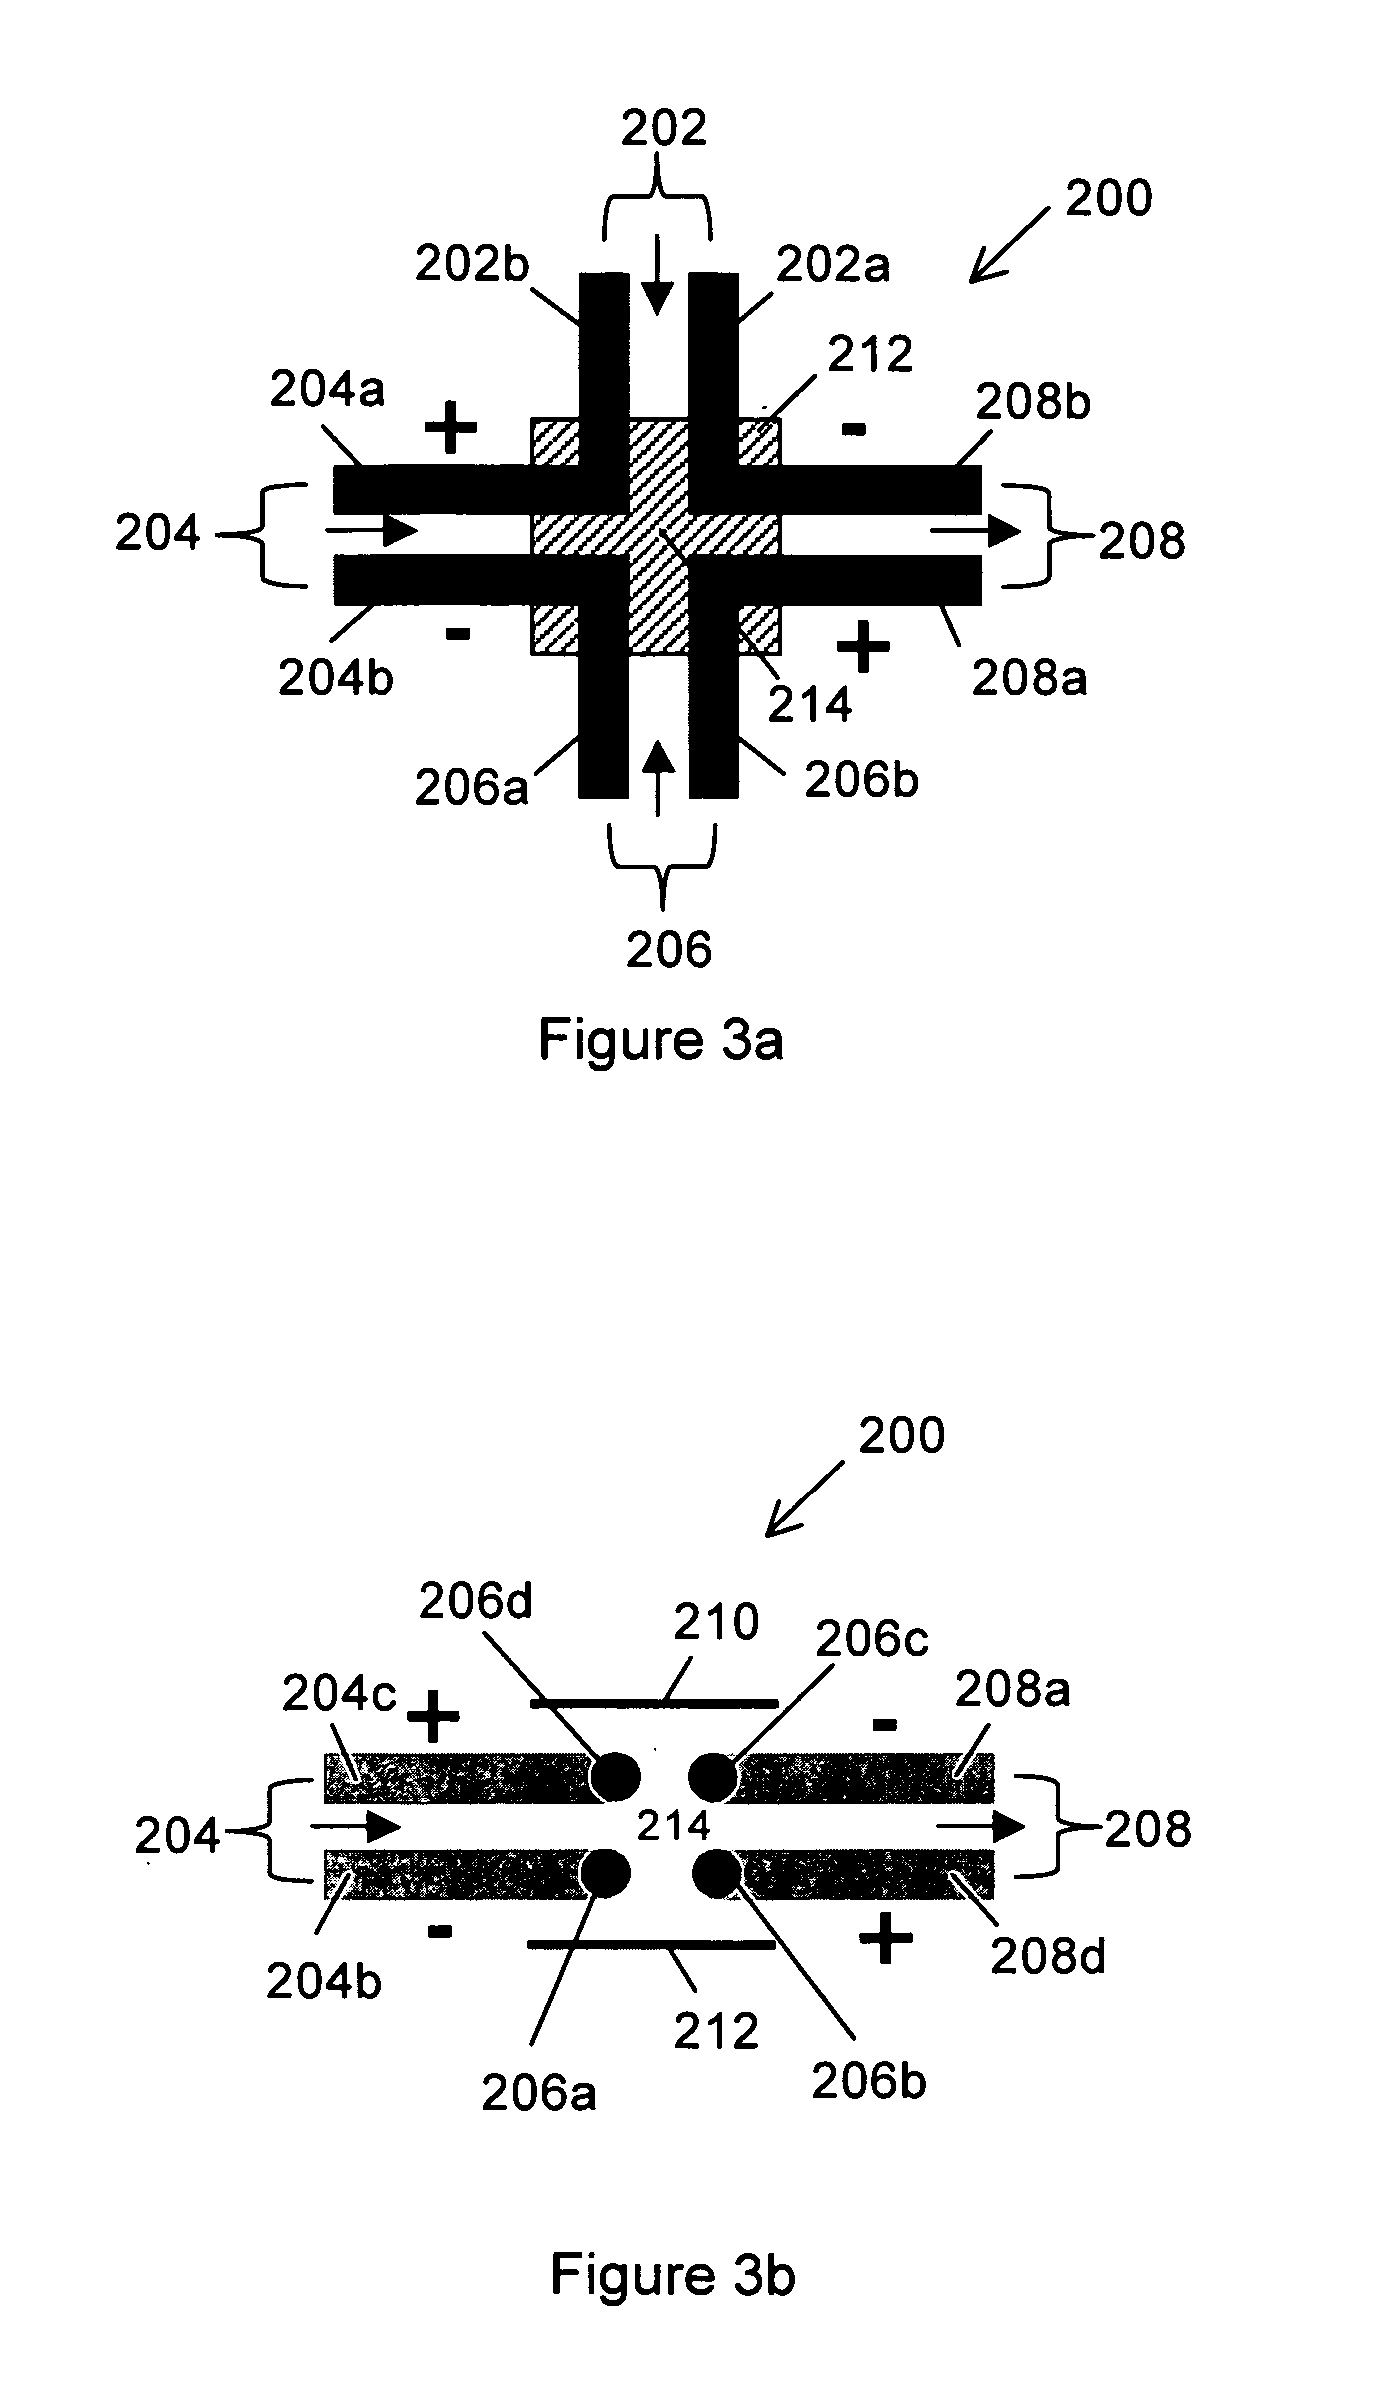 Mass spectrometer multiple device interface for parallel configuration of multiple devices